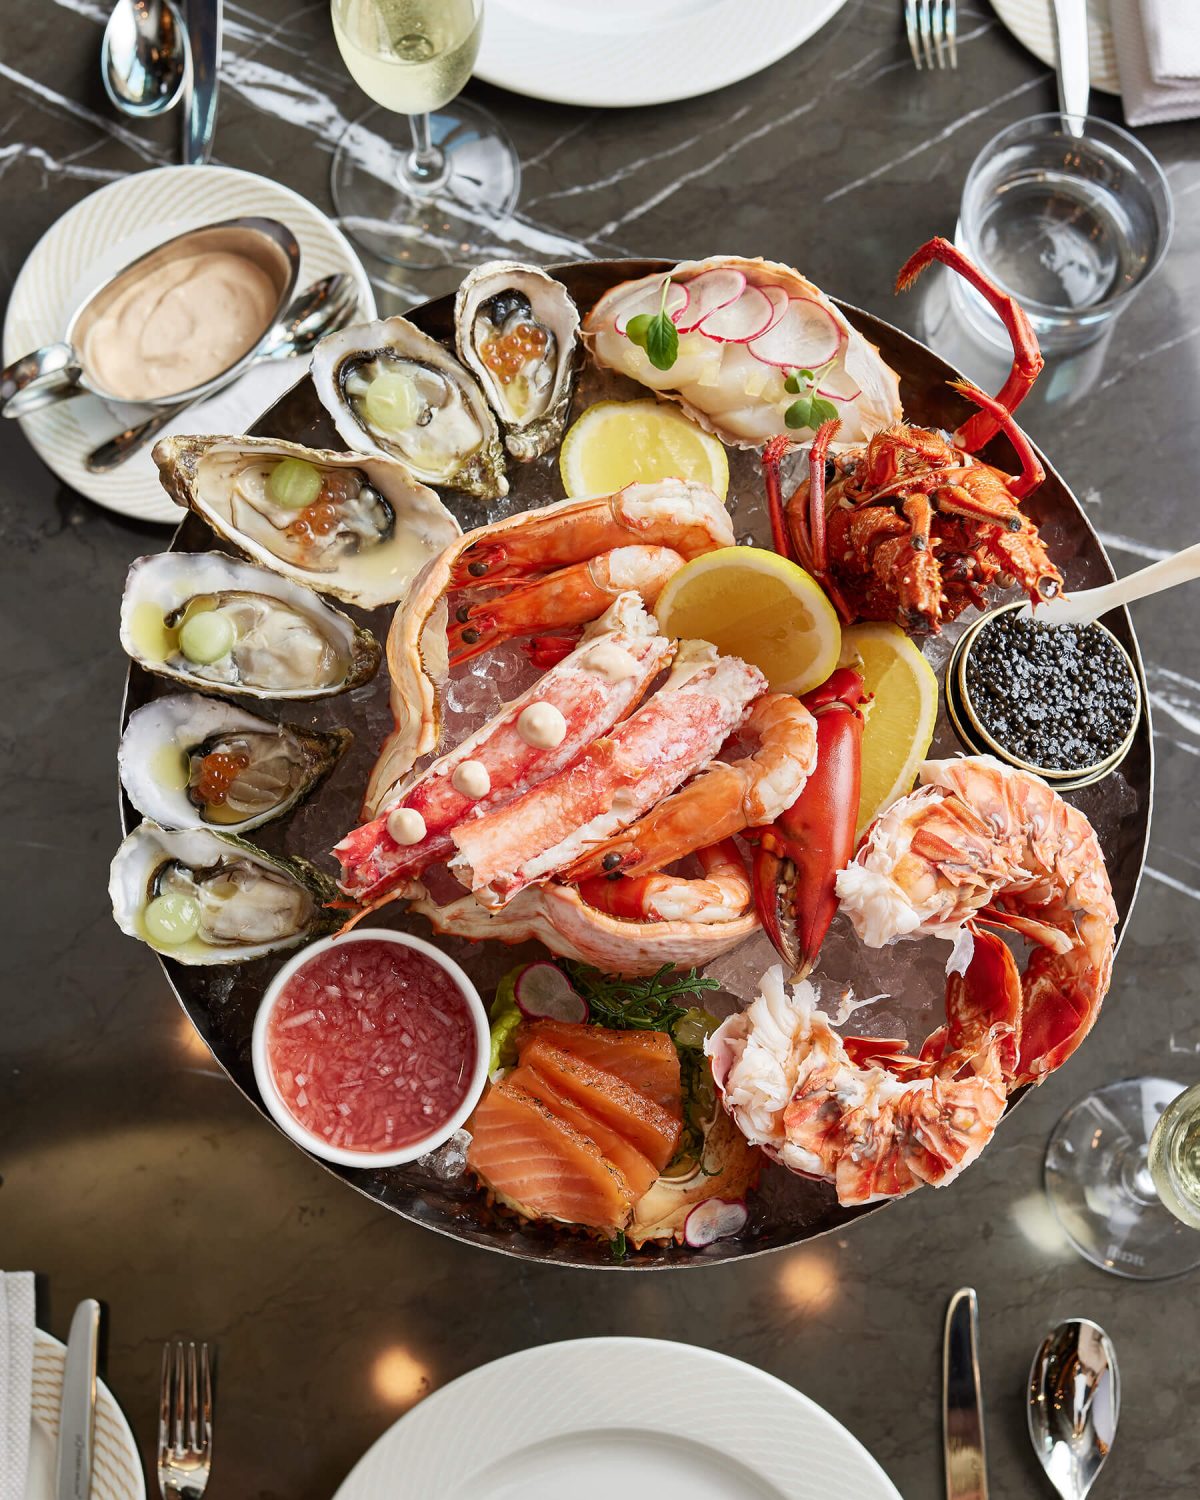 Revive your tastebuds with the ocean’s best offerings on Gordon Ramsay’s Seafood Platter - Sunway City Kuala Lumpur